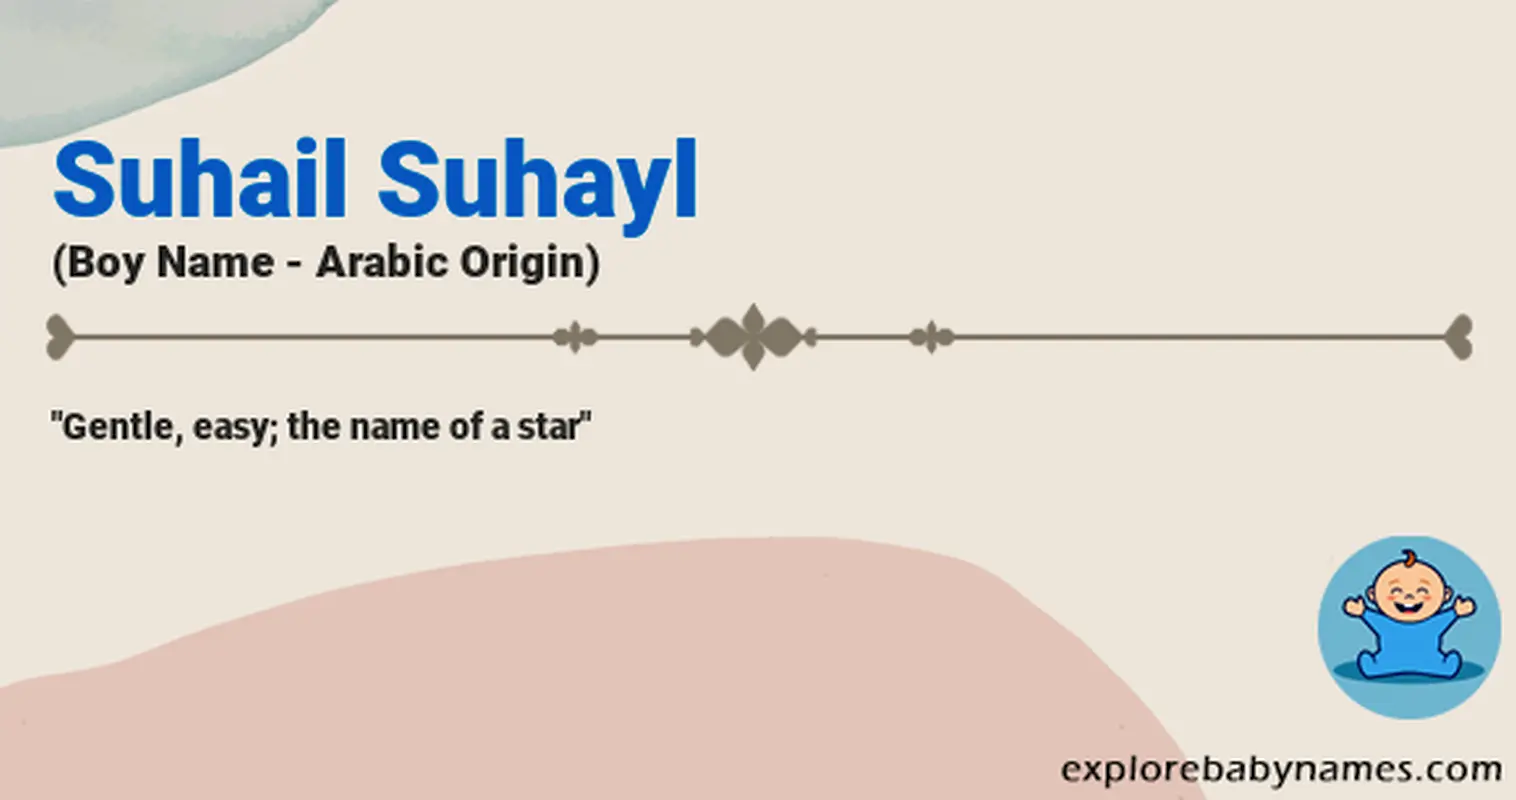 Meaning of Suhail Suhayl